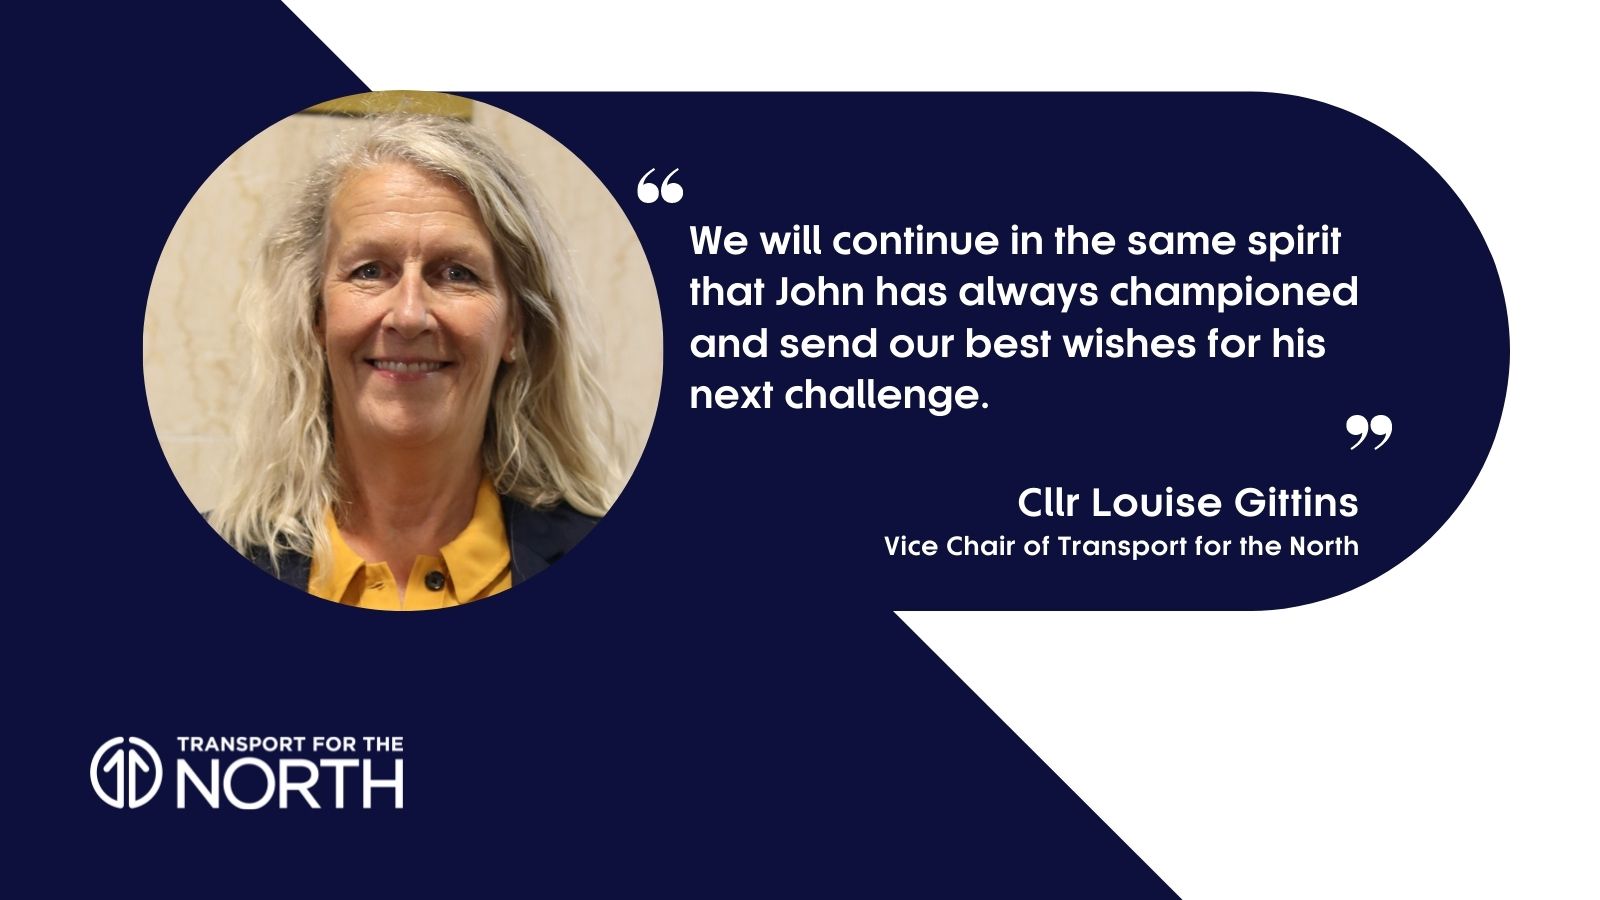 Cllr Louise Gittins, Vice Chair of Transport for the North, comments on John Cridland standing down as chairman